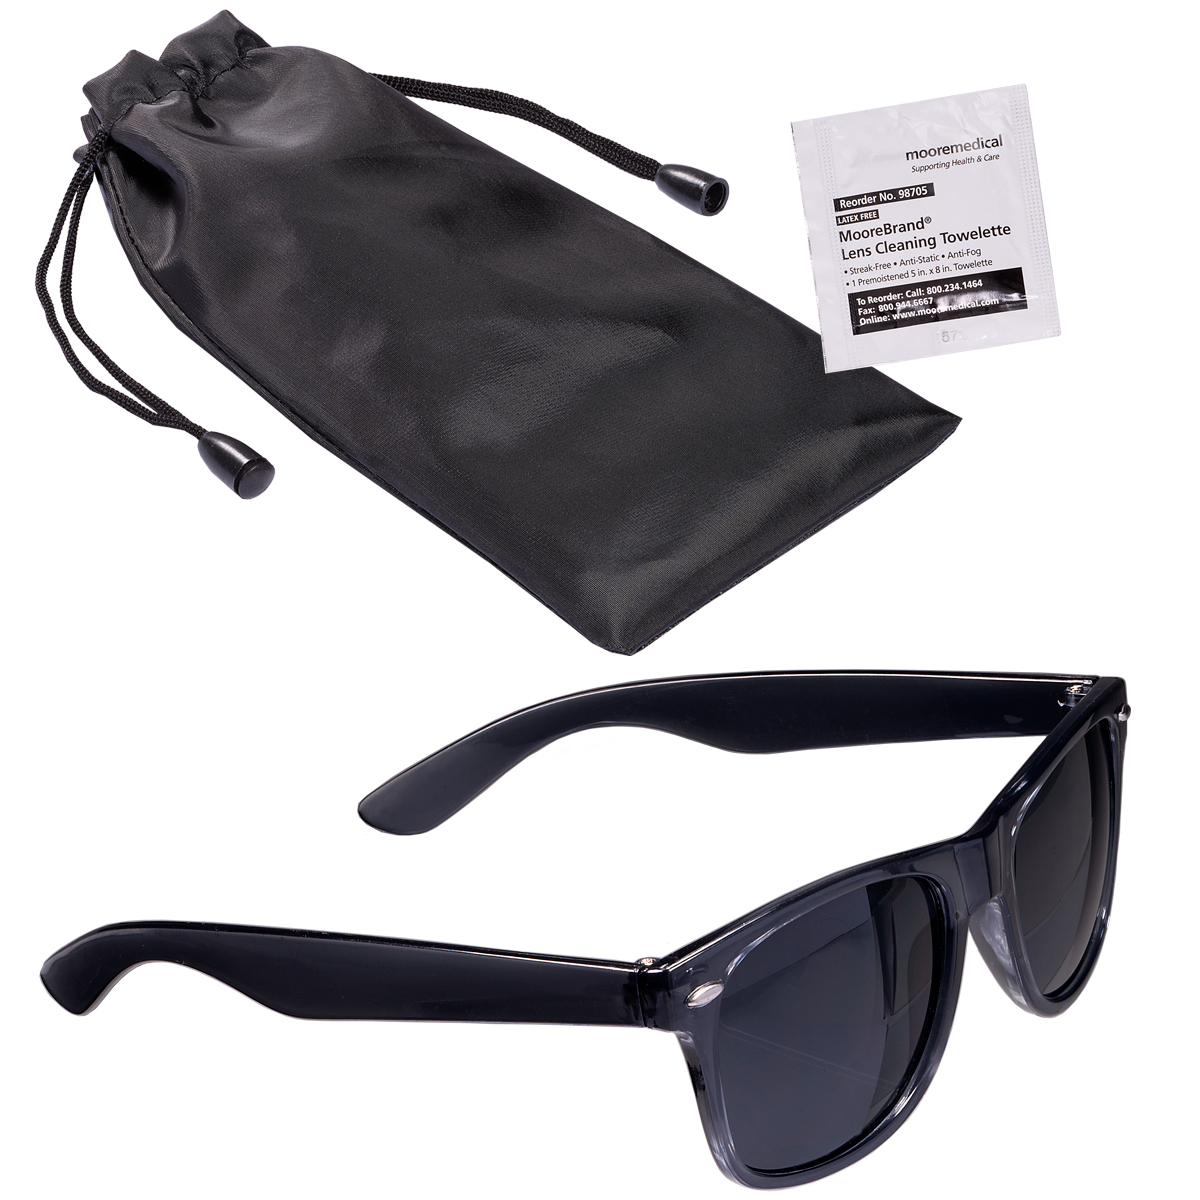 Fashion Sunglasses & Lens Cleaning Wipe in a Pouch